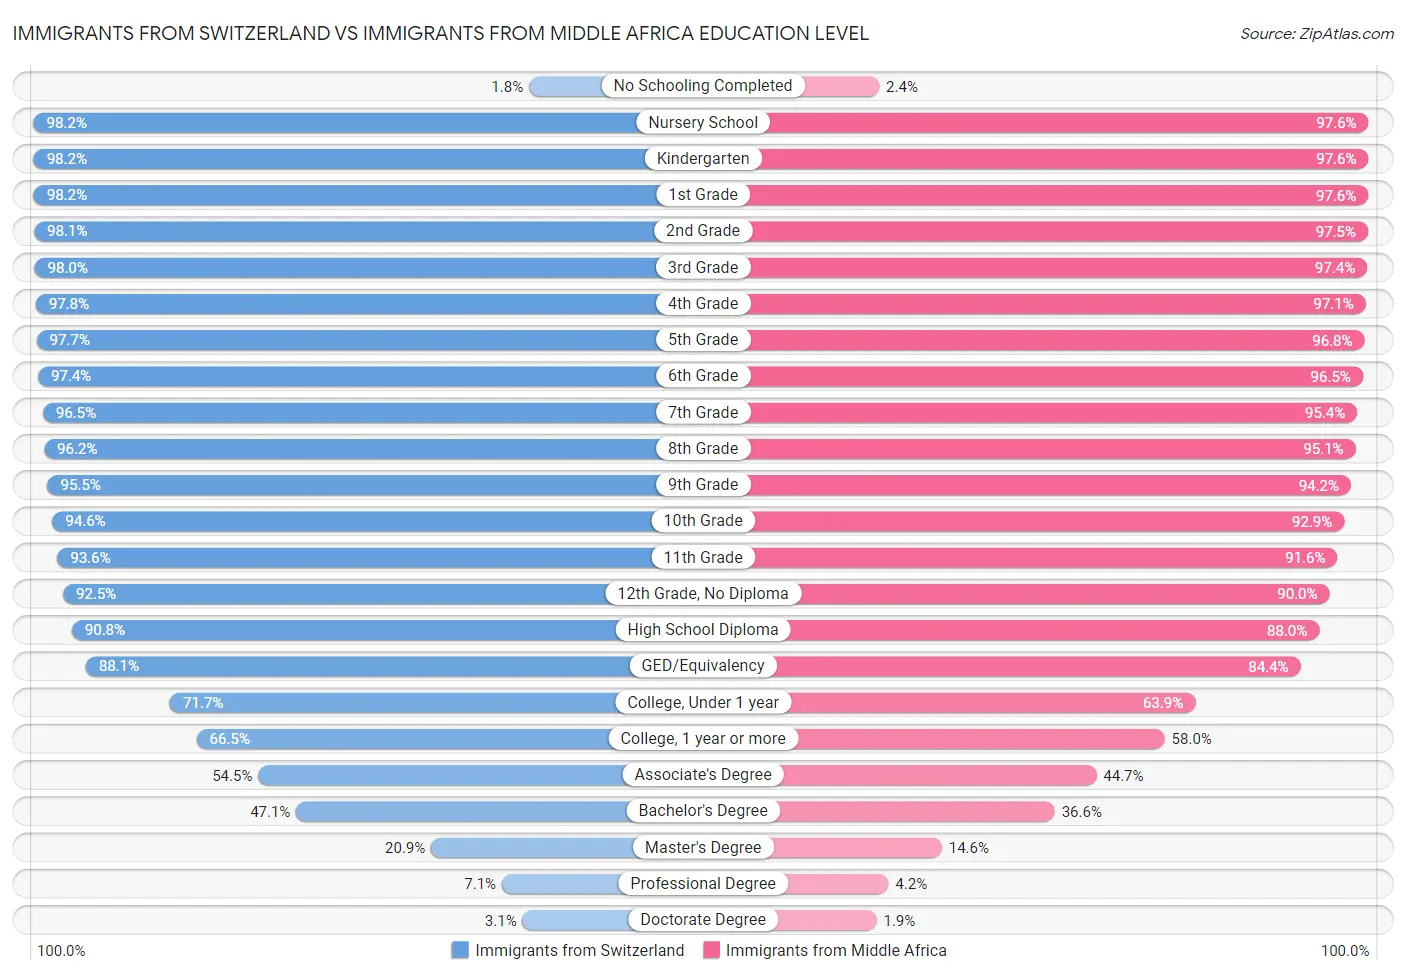 Immigrants from Switzerland vs Immigrants from Middle Africa Education Level